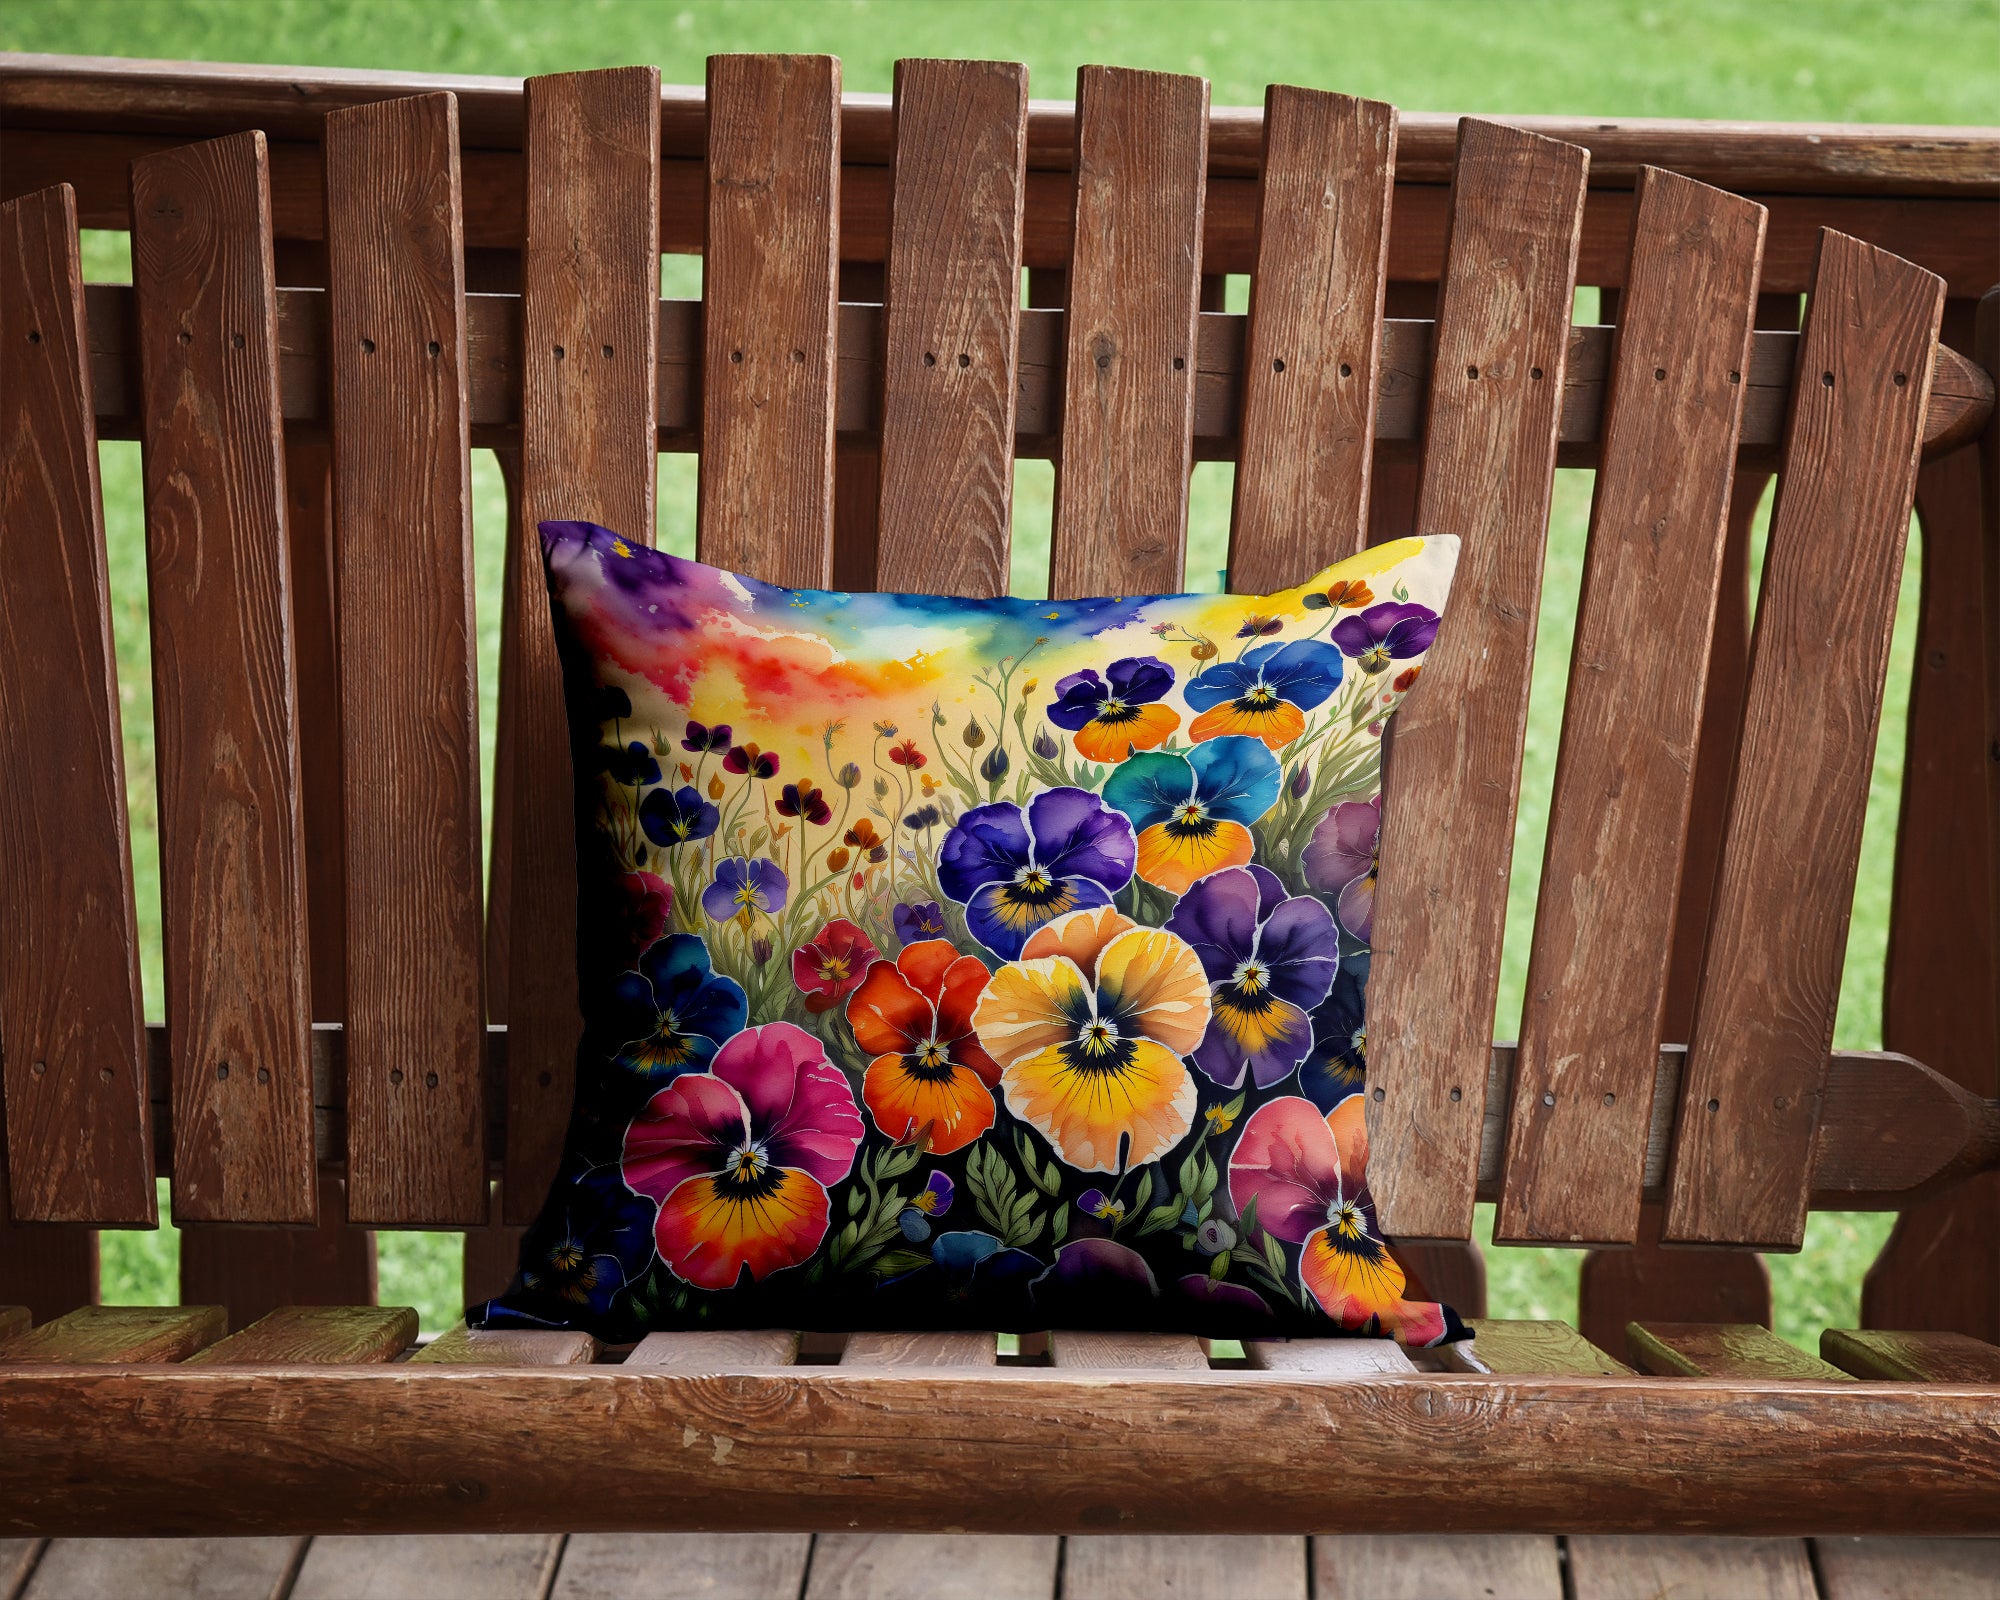 Buy this Colorful Pansies Fabric Decorative Pillow